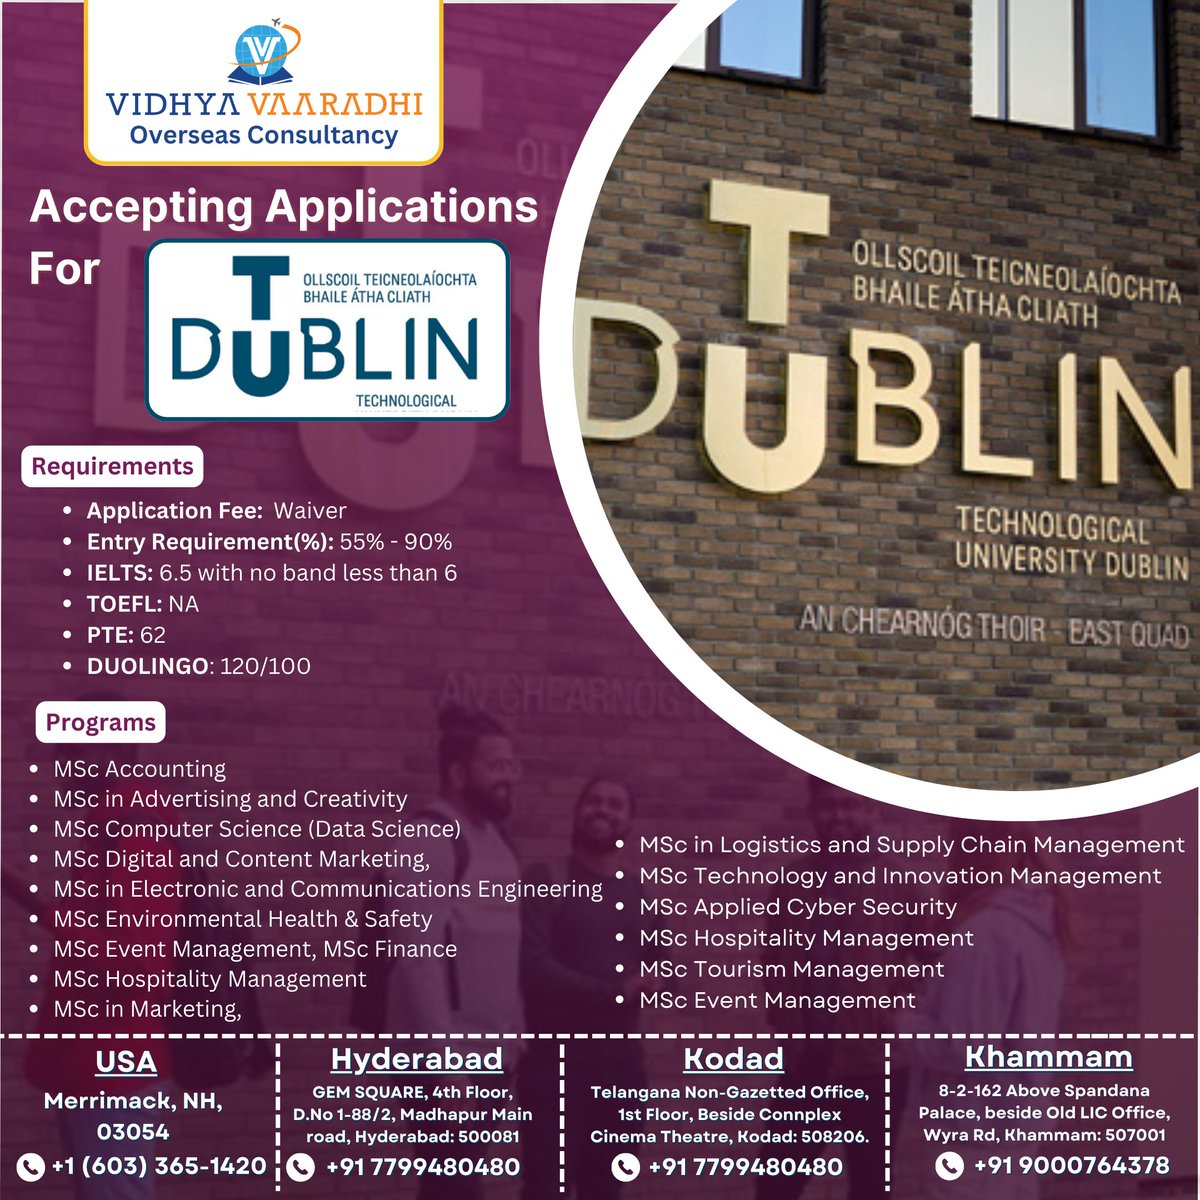 Study in Ireland | Applications are now open for Technological University Dublin. Start your journey in Ireland today! Contact us now.
#StudyInIreland #Irelandeducationconsultants #Irelandeducation #masters #studymsinireland #Ireland #vidhyavaaradhi #TechnologicalUniversityDublin